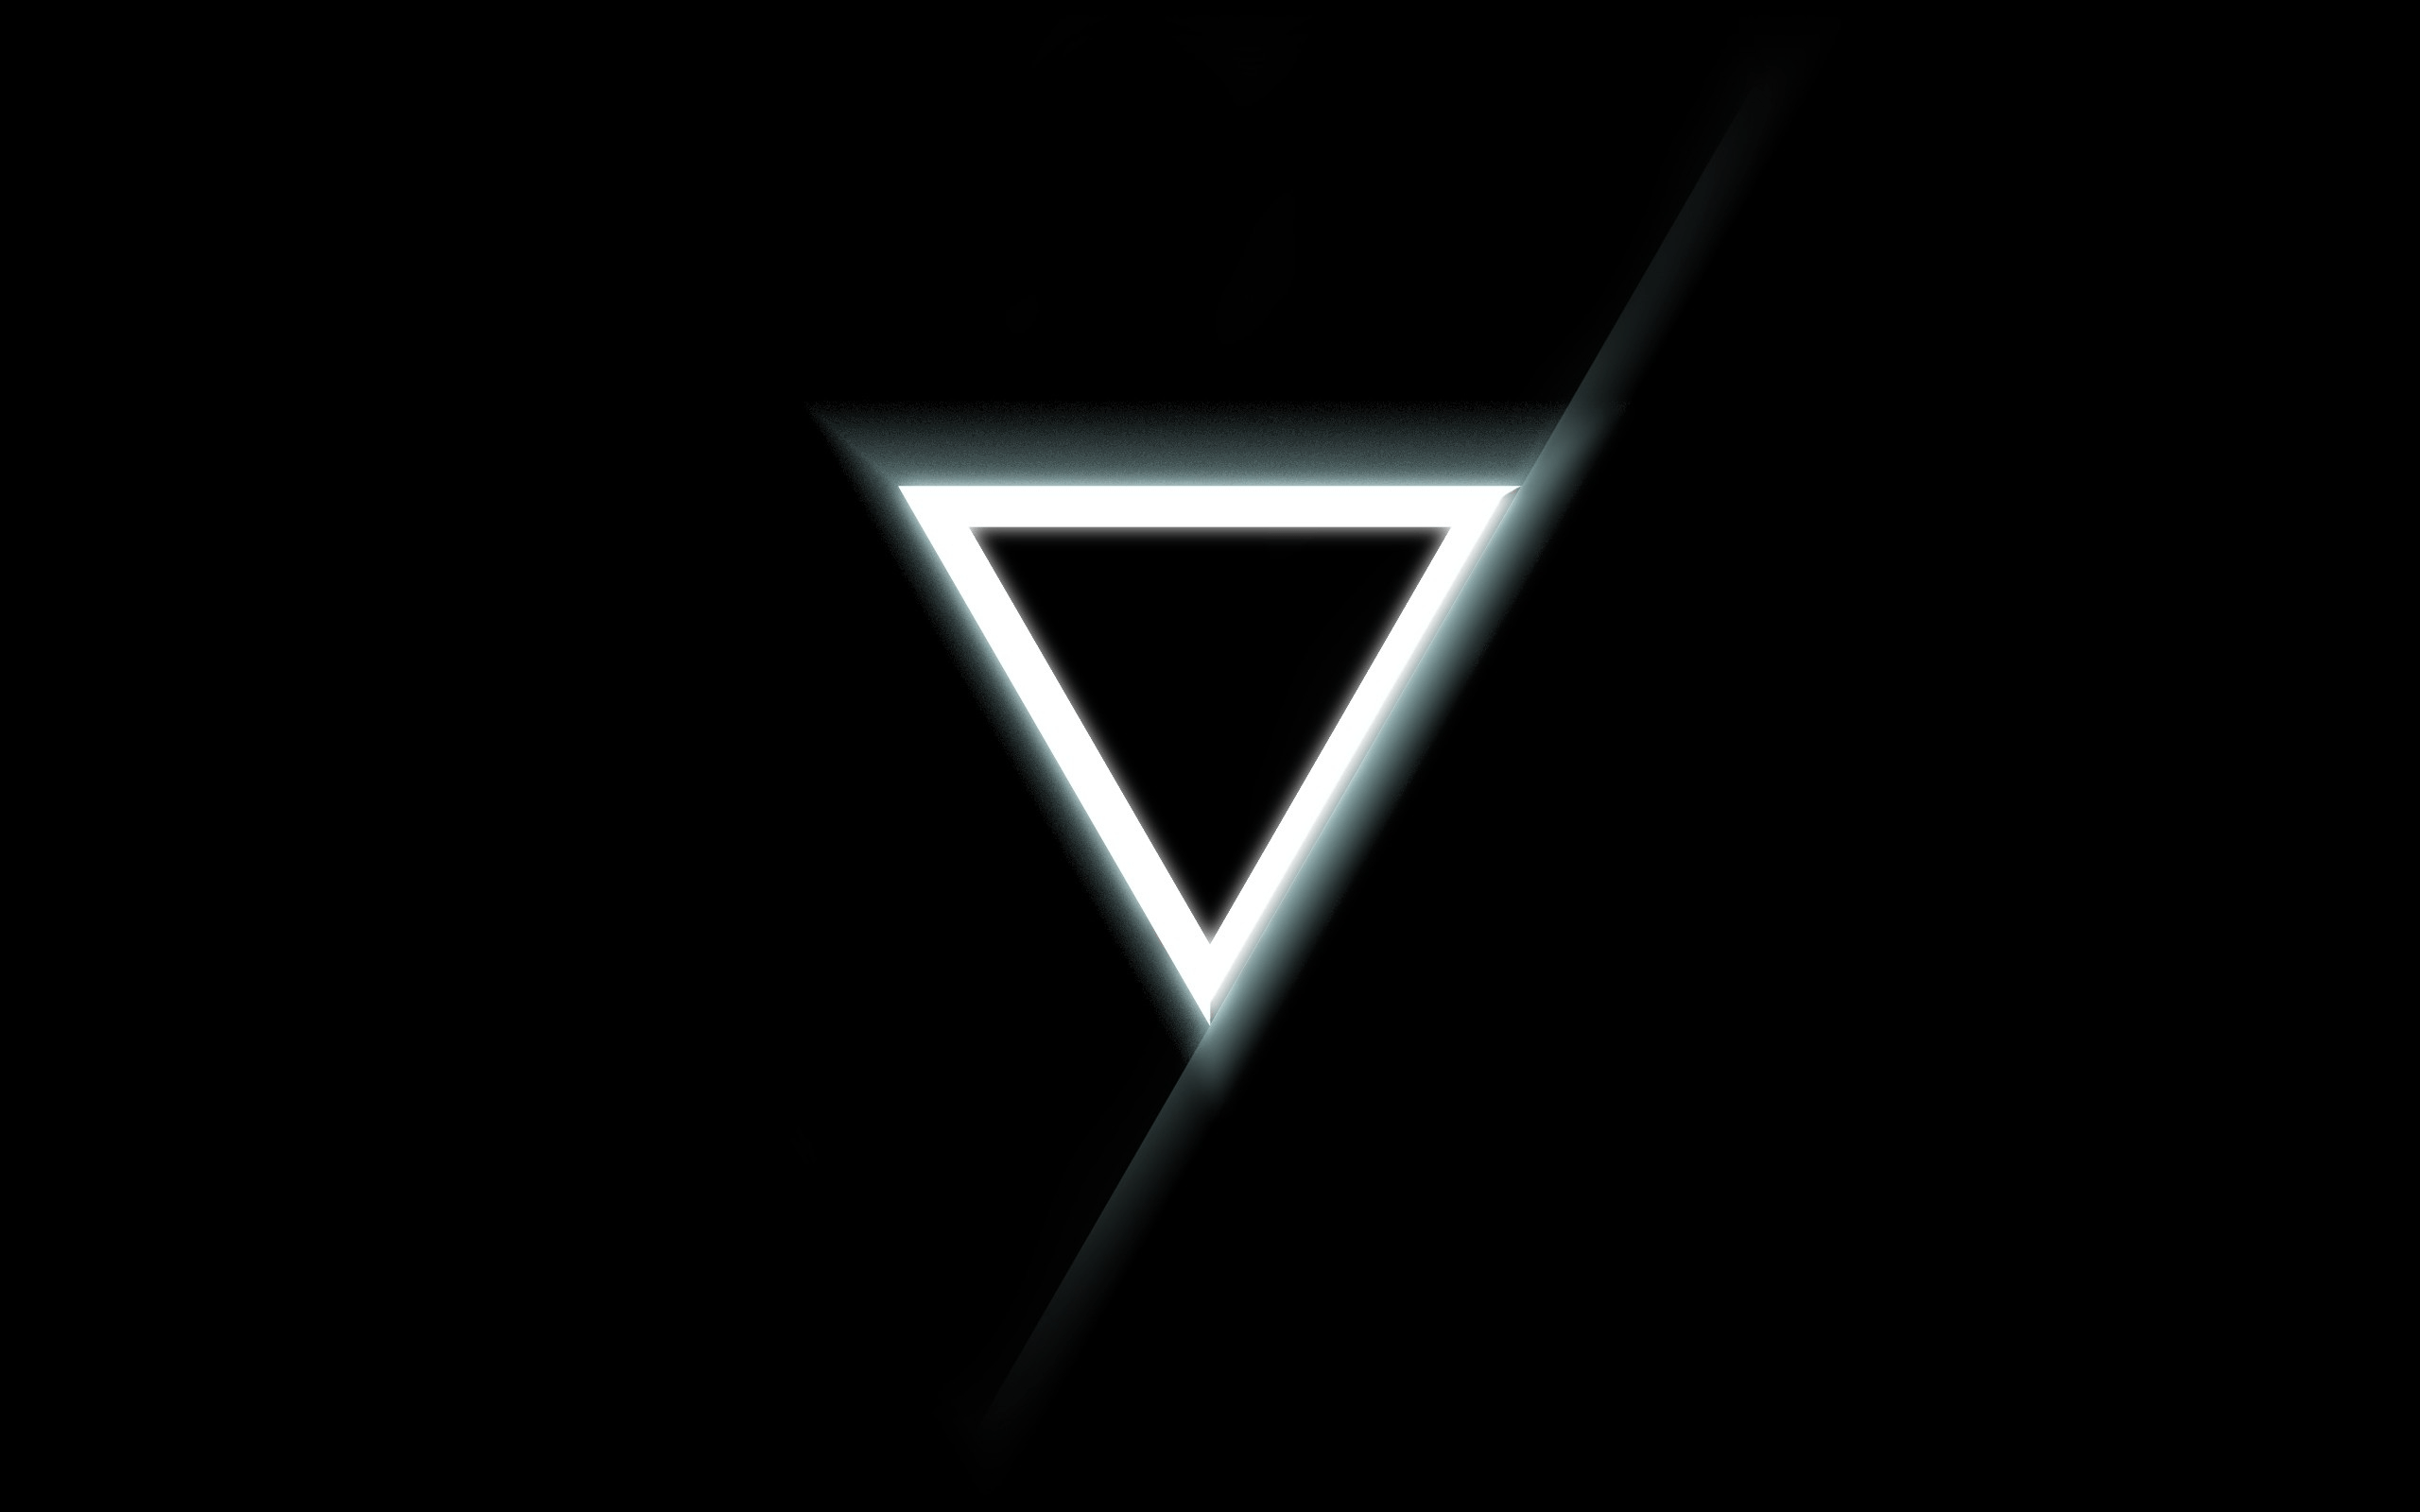 Black and White Triangle Logo - Black and White Triangle Wallpaper for Phone and HD Desktop Backgrounds